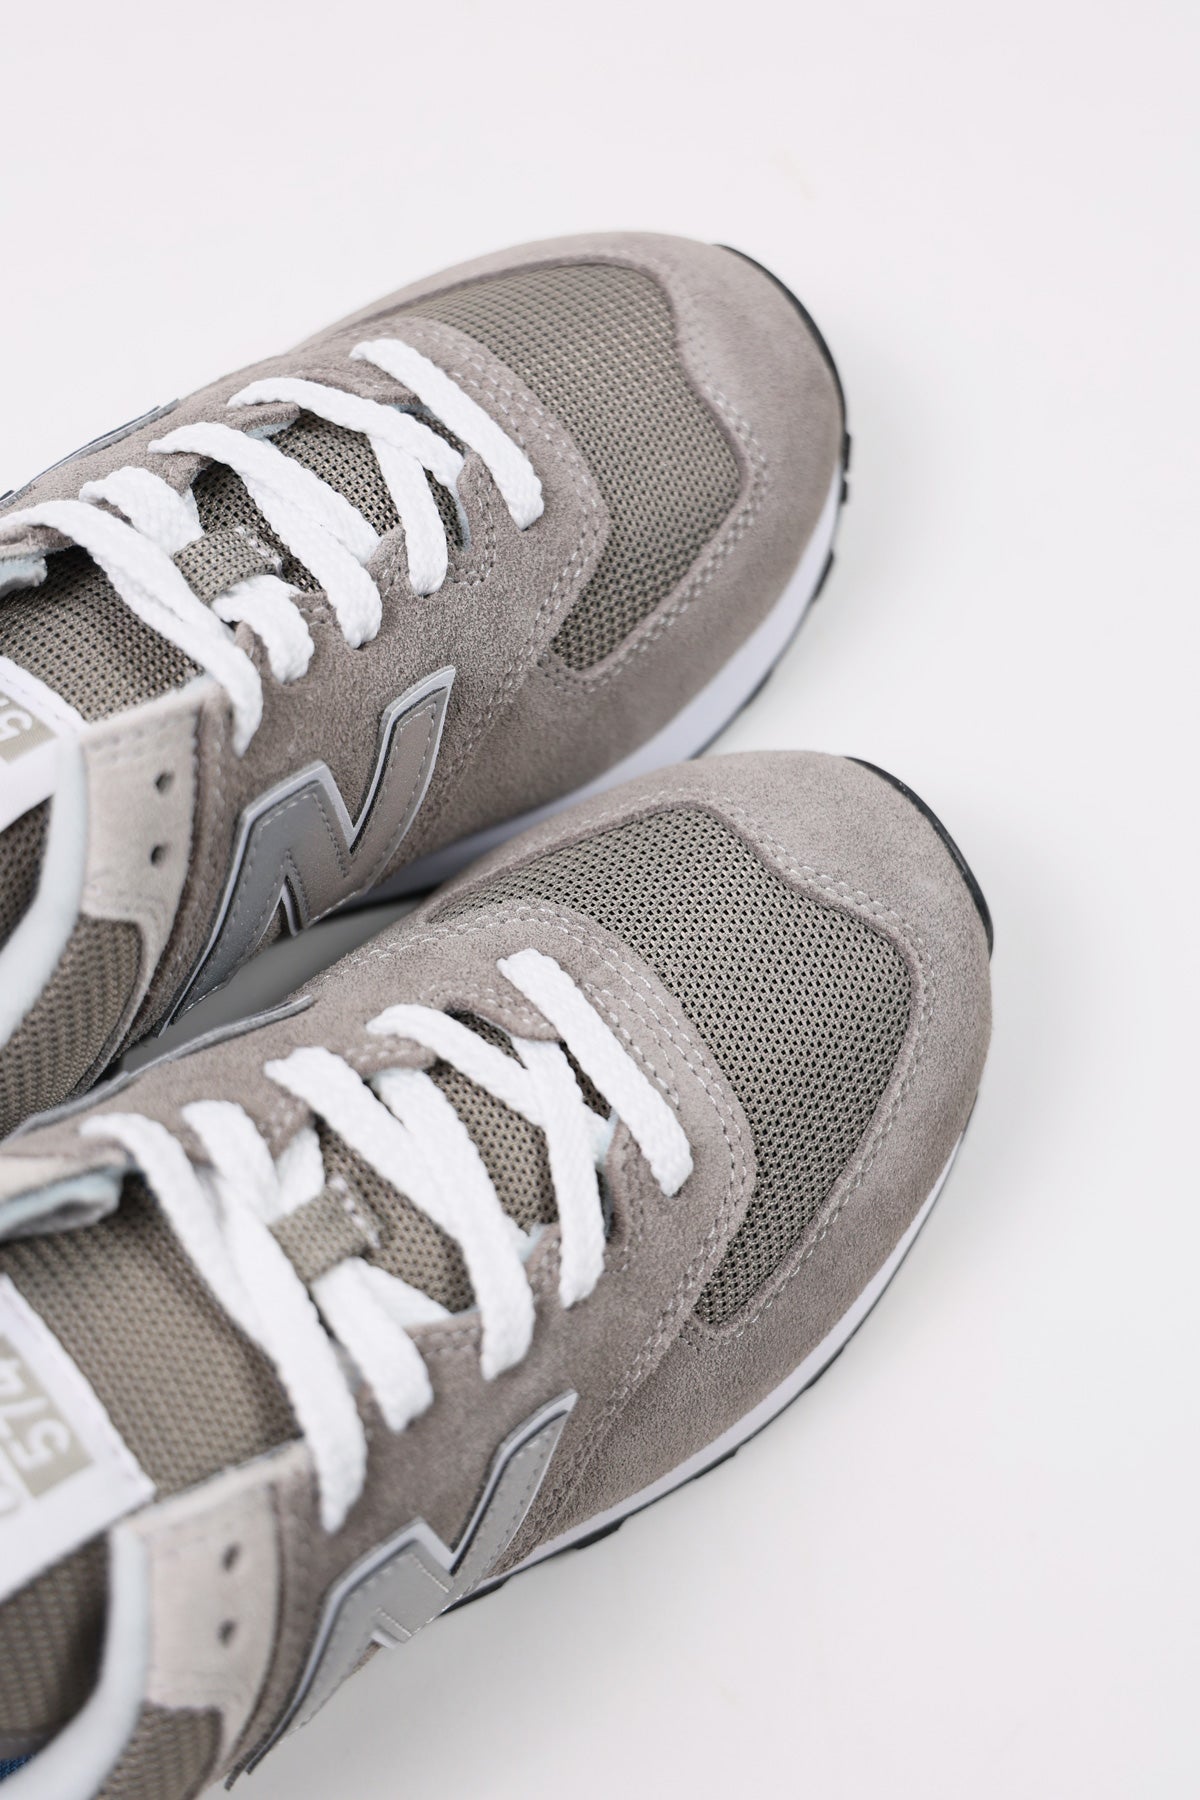 574 Core sneakers in grey - New Balance